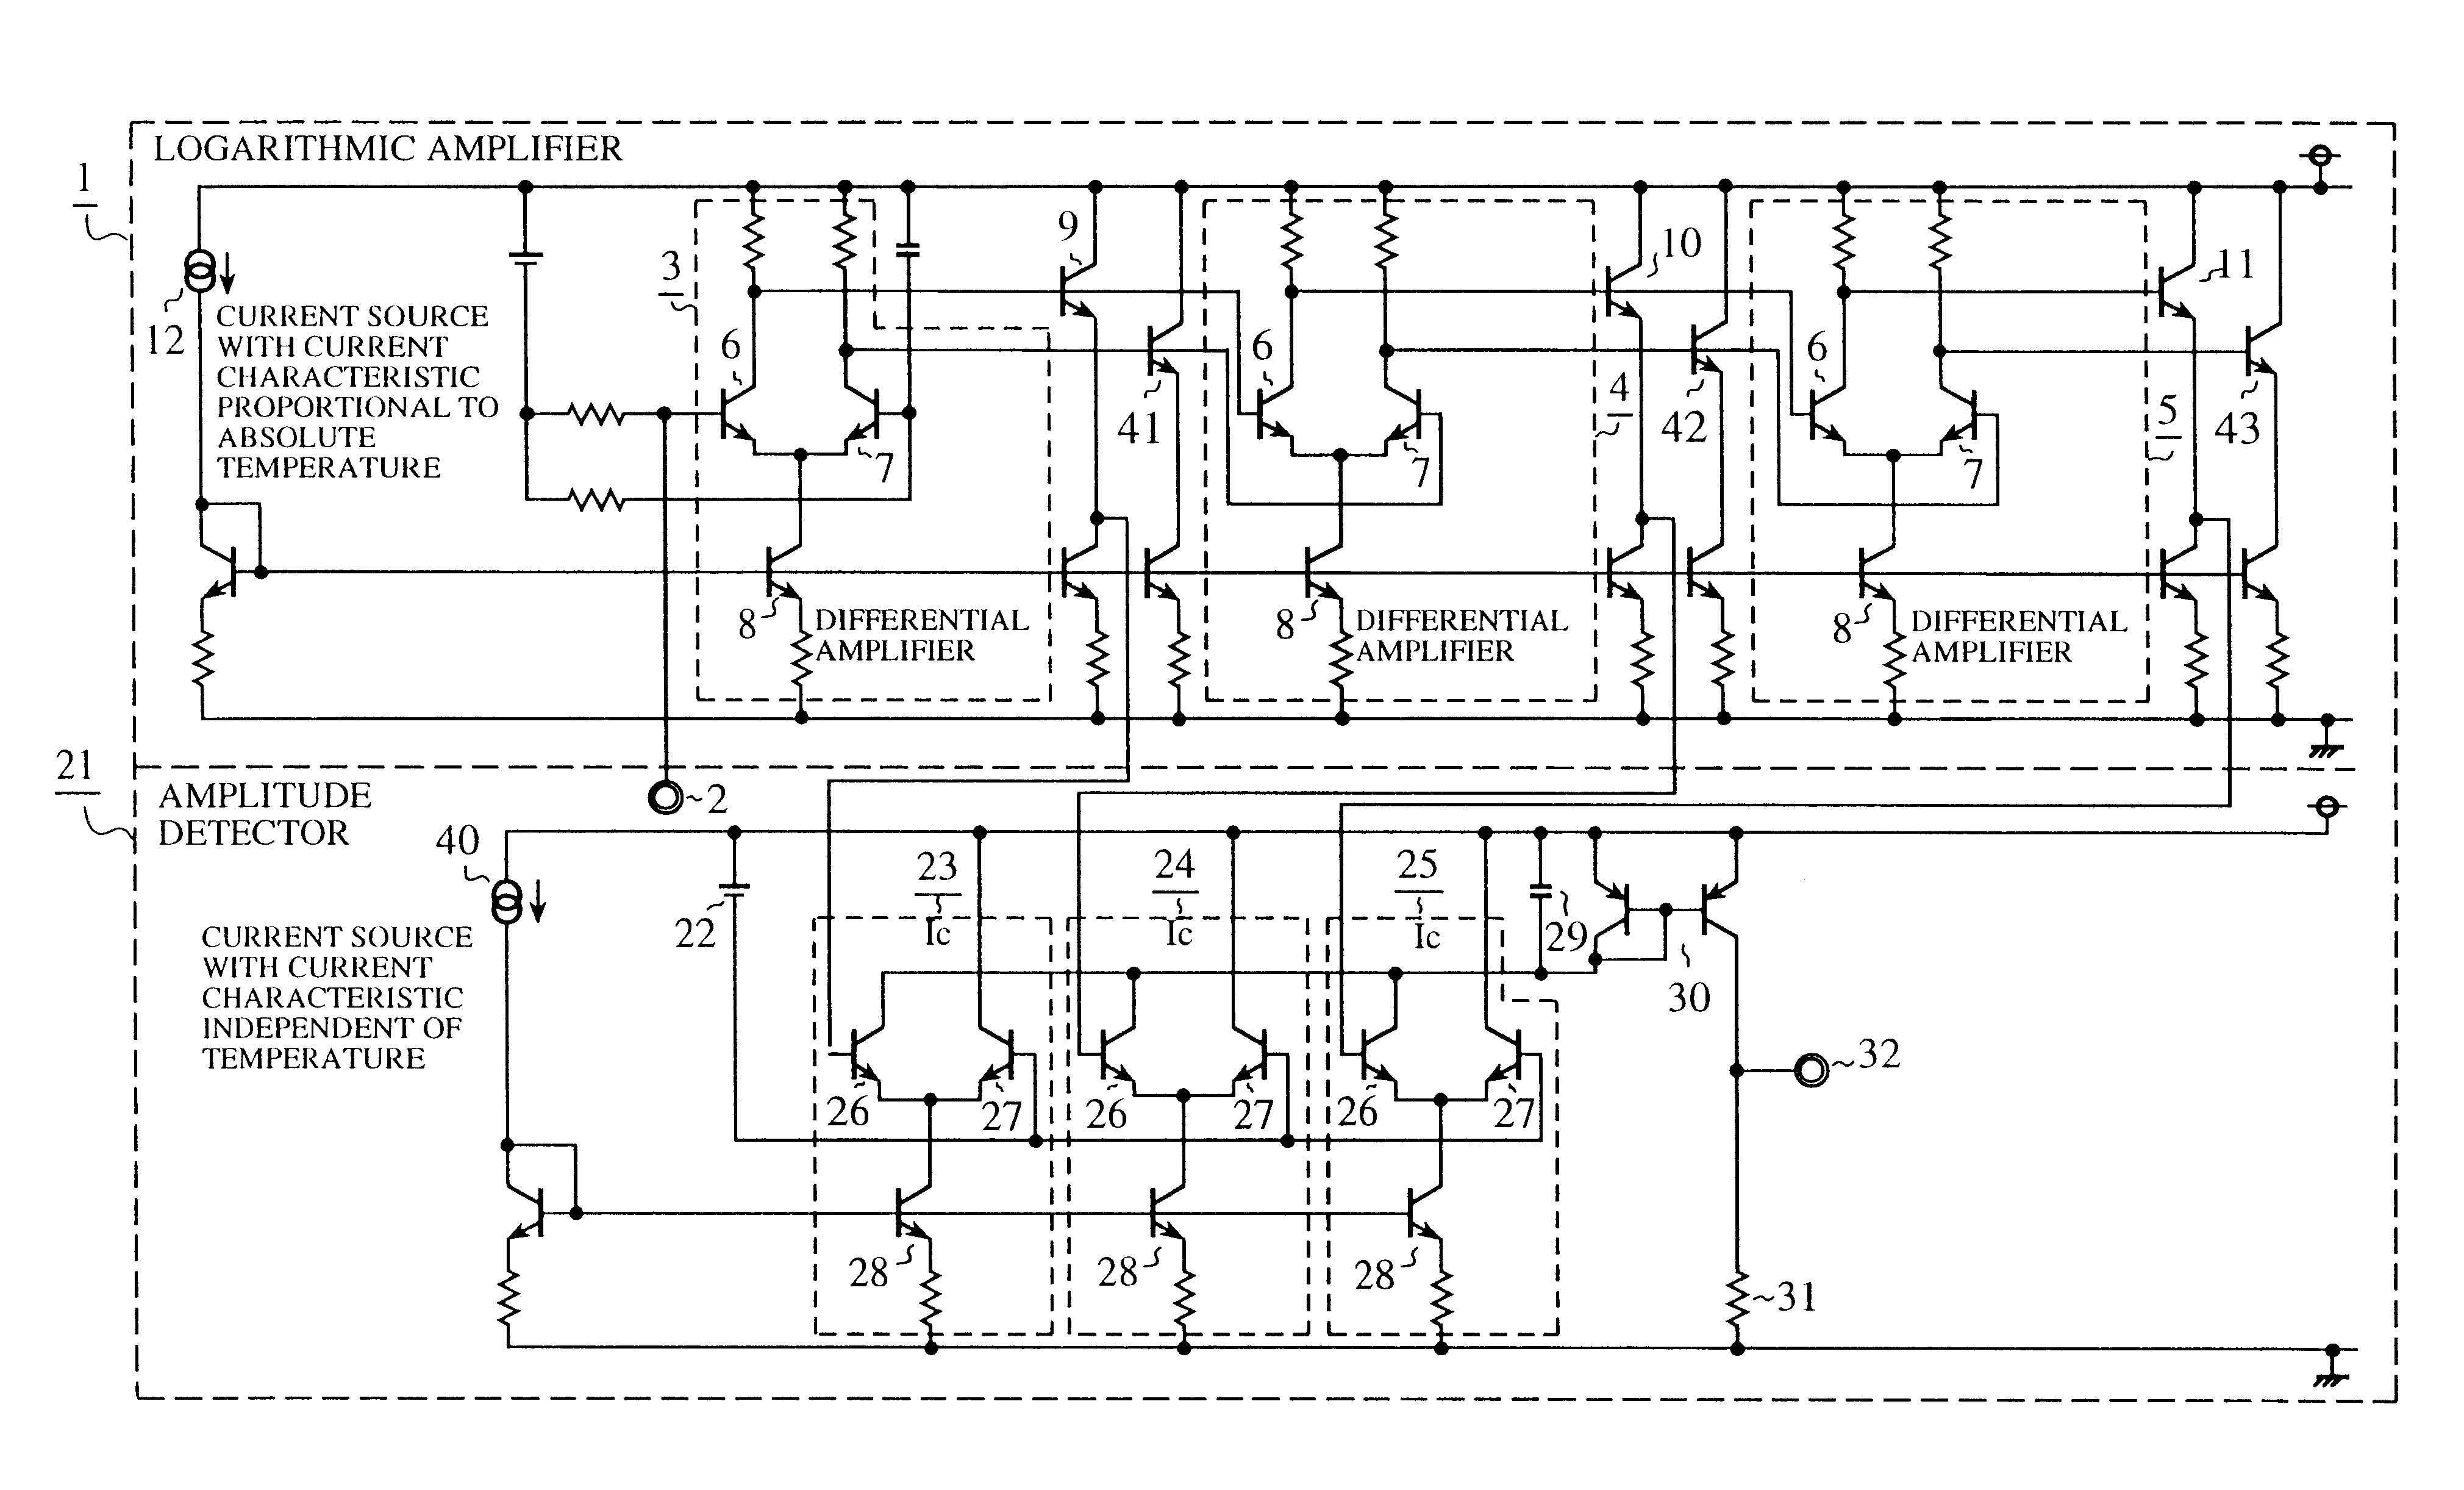 Signal strength detecting device with little temperature dependence